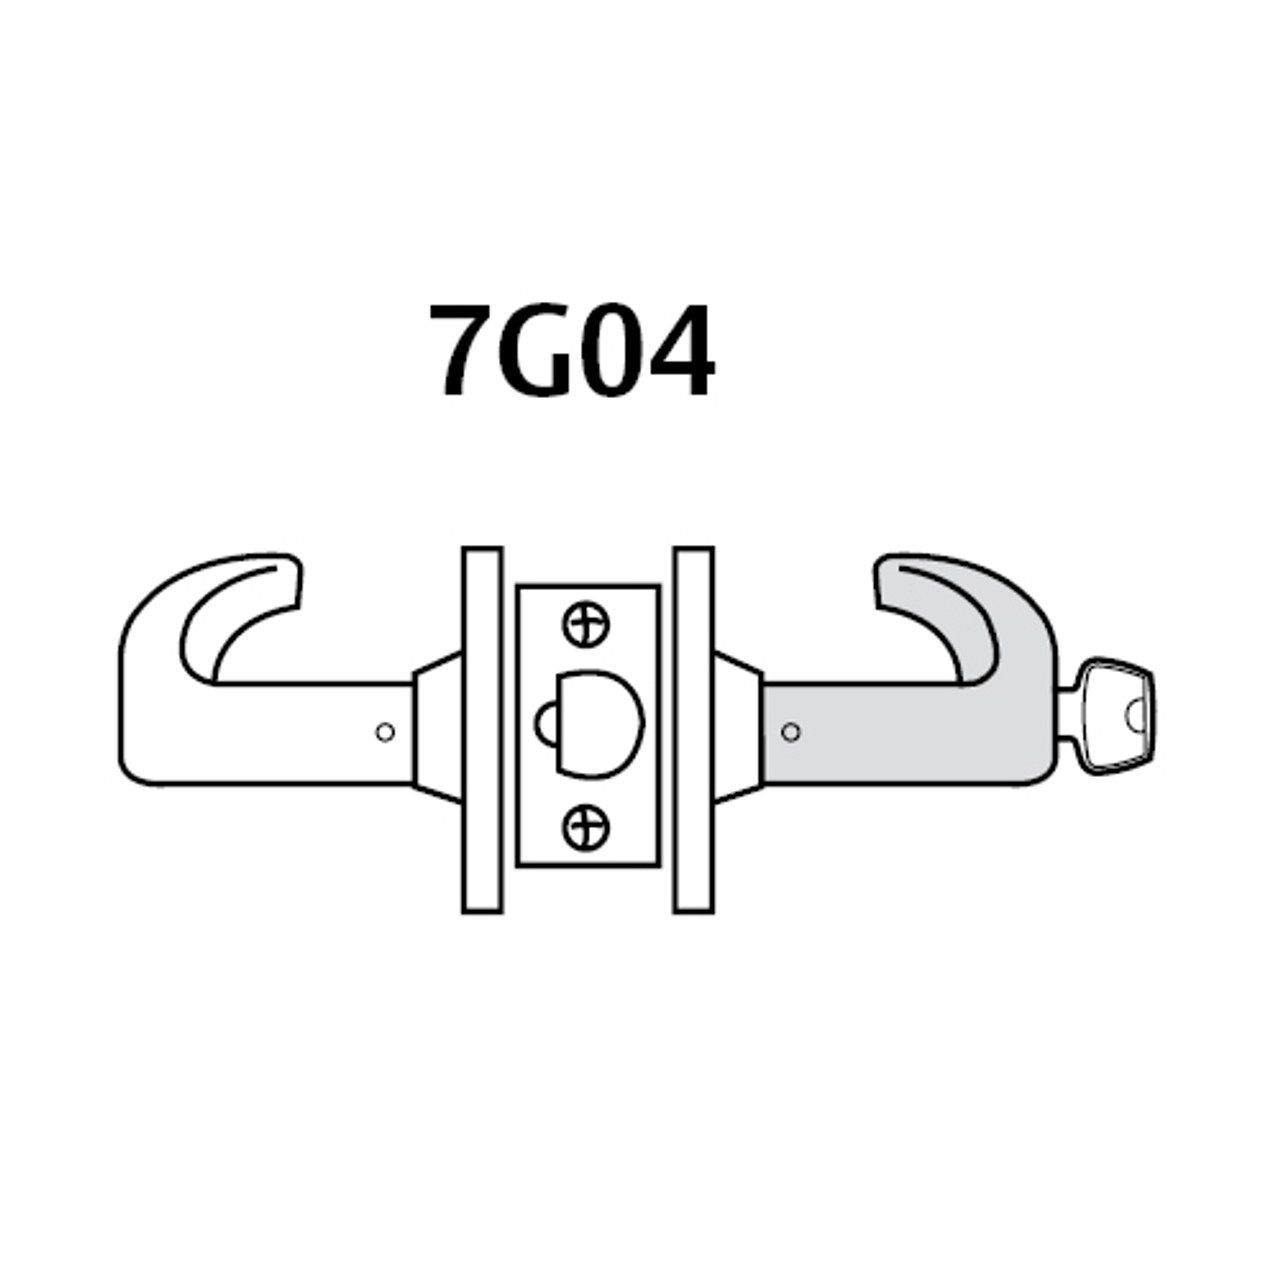 2870-7G04-LB-26D Sargent 7 Line Cylindrical Storeroom/Closet Locks with B Lever Design and L Rose Prepped for SFIC in Satin Chrome